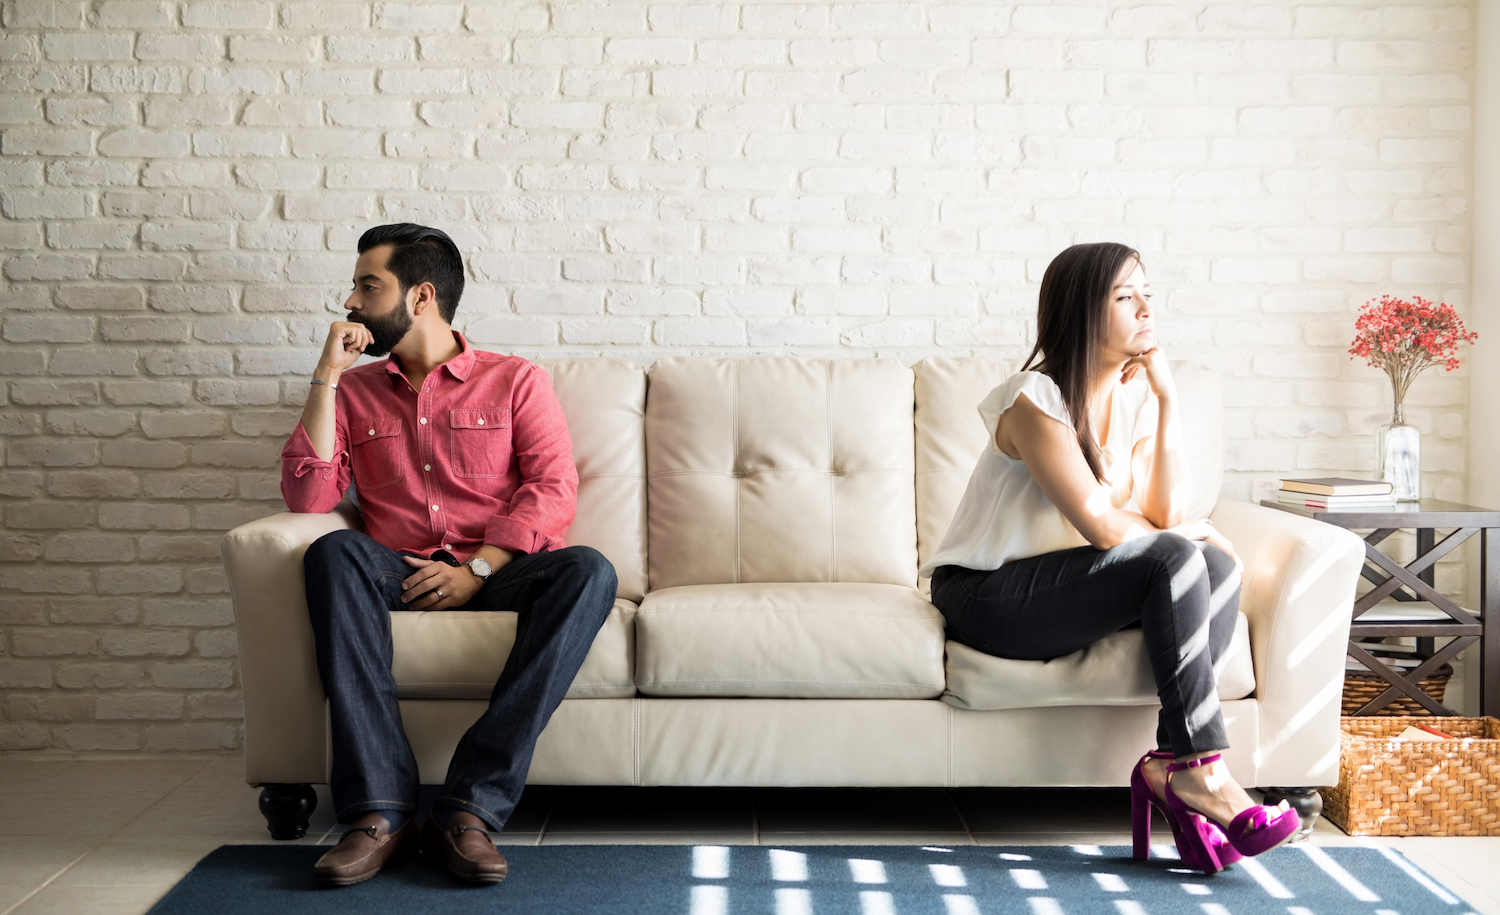 A highly sensitive person sits opposite their partner on a couch as they break up